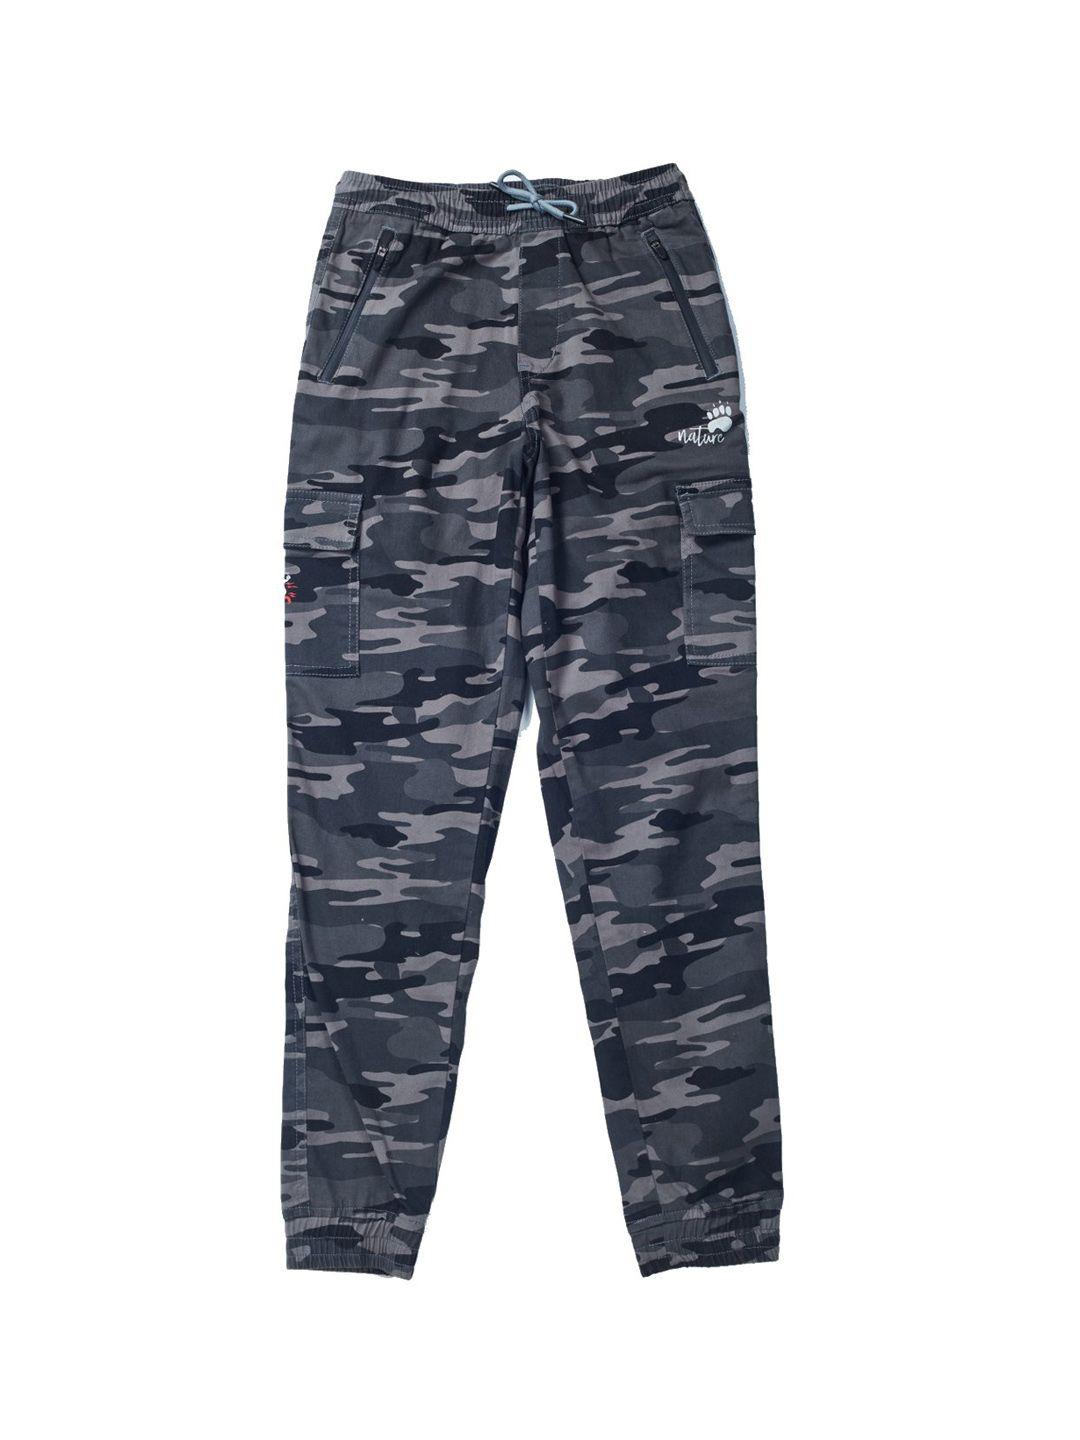 gini and jony boys grey camouflage printed joggers trouser